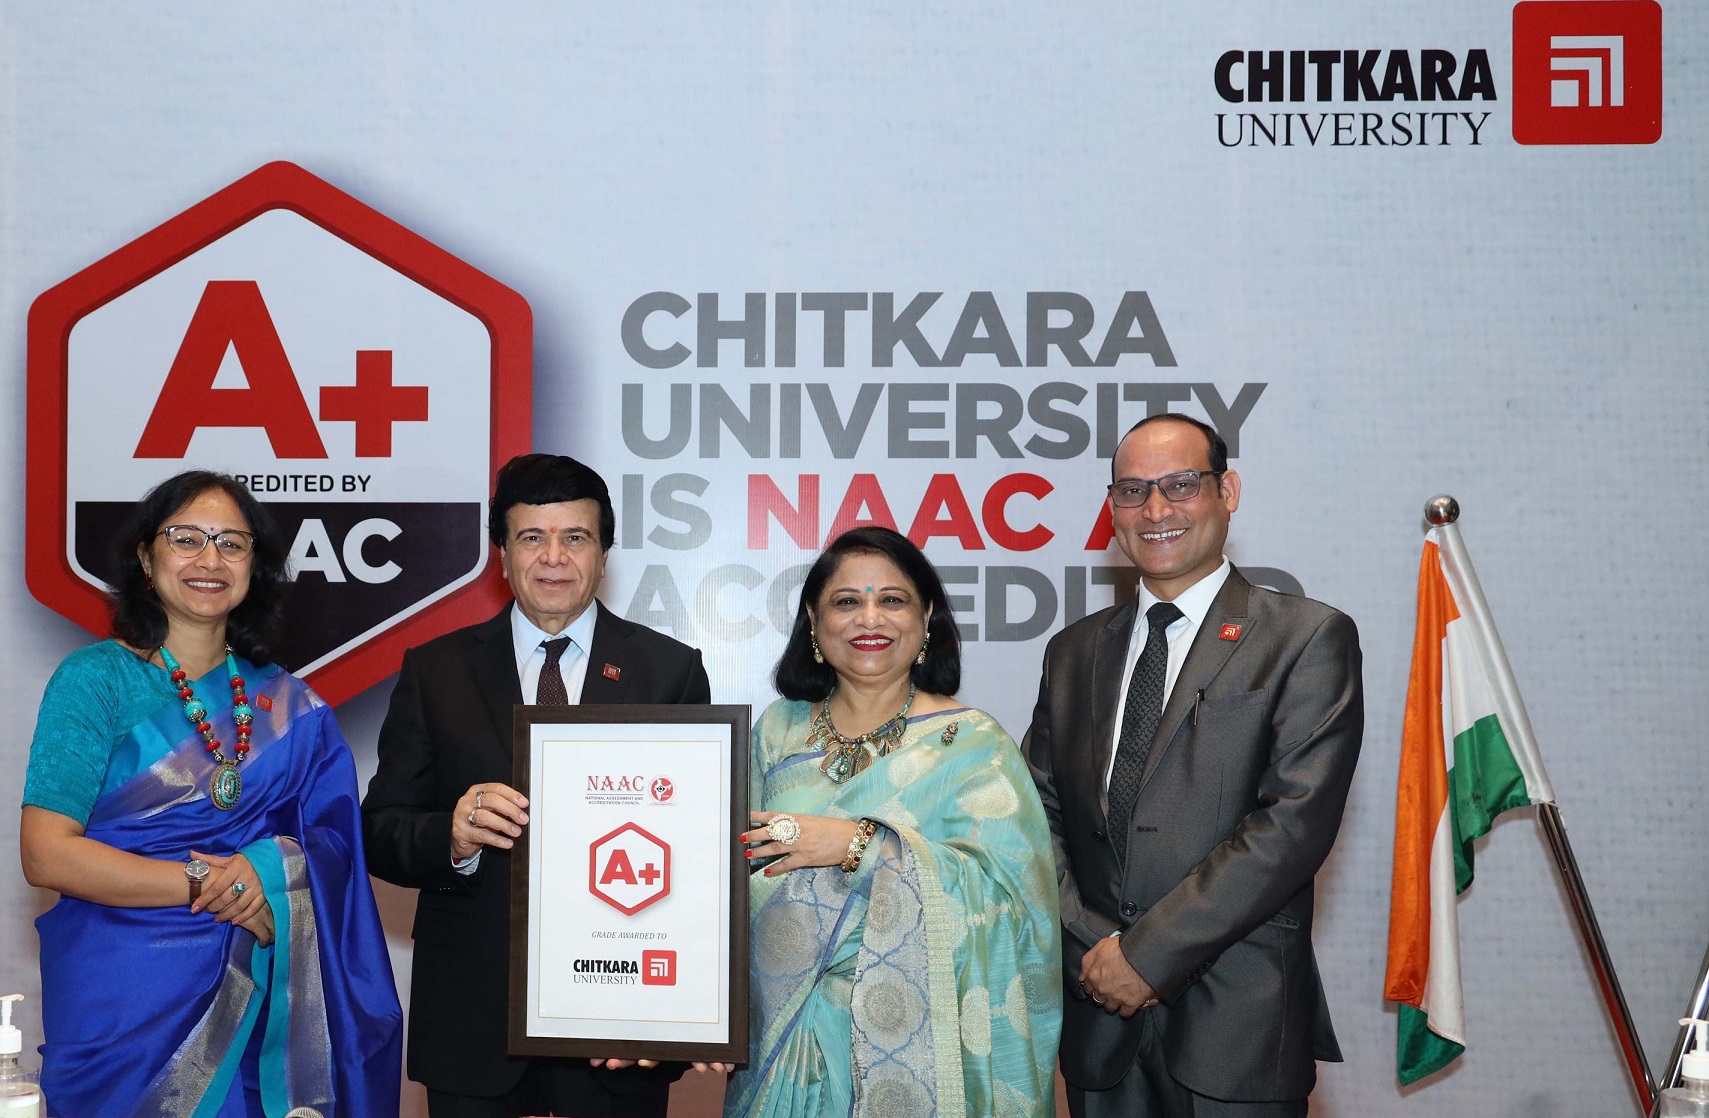 Chitkara University bags A+ NAAC Accreditation; scored 3.26 on 4 point scale